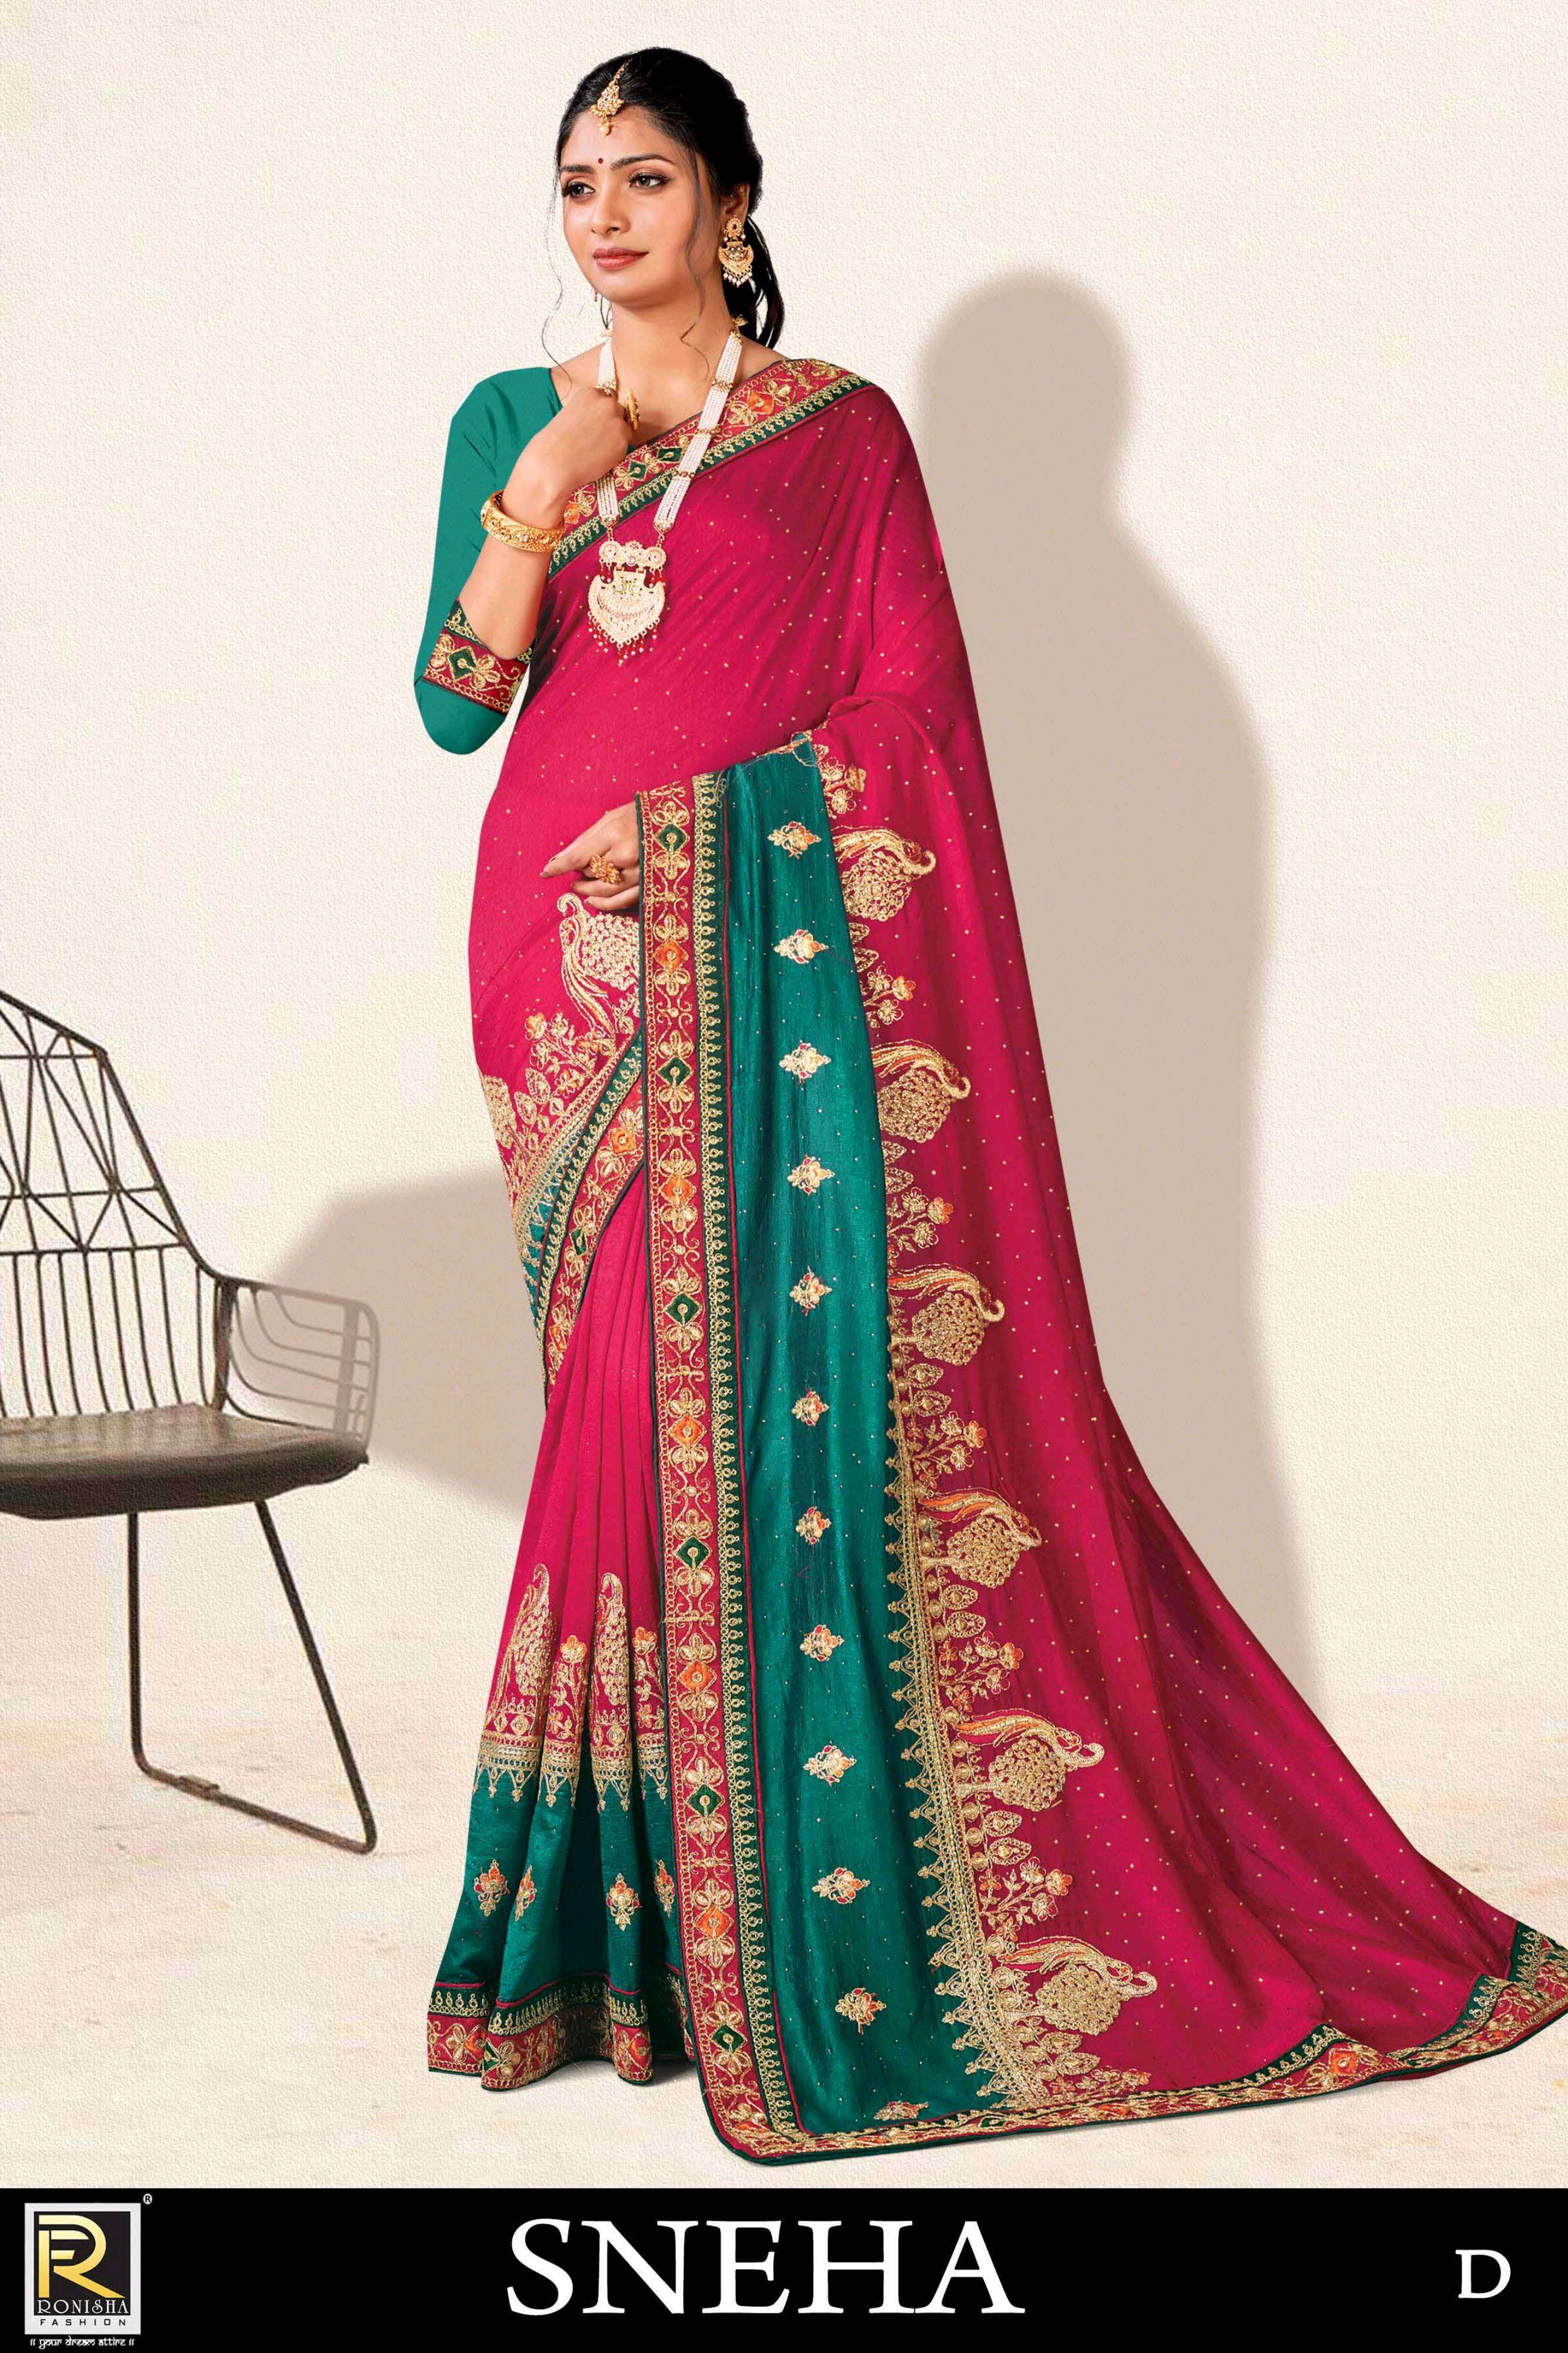 Sneha new launching product by ranjna saree embroidery worked designer saree collecton 